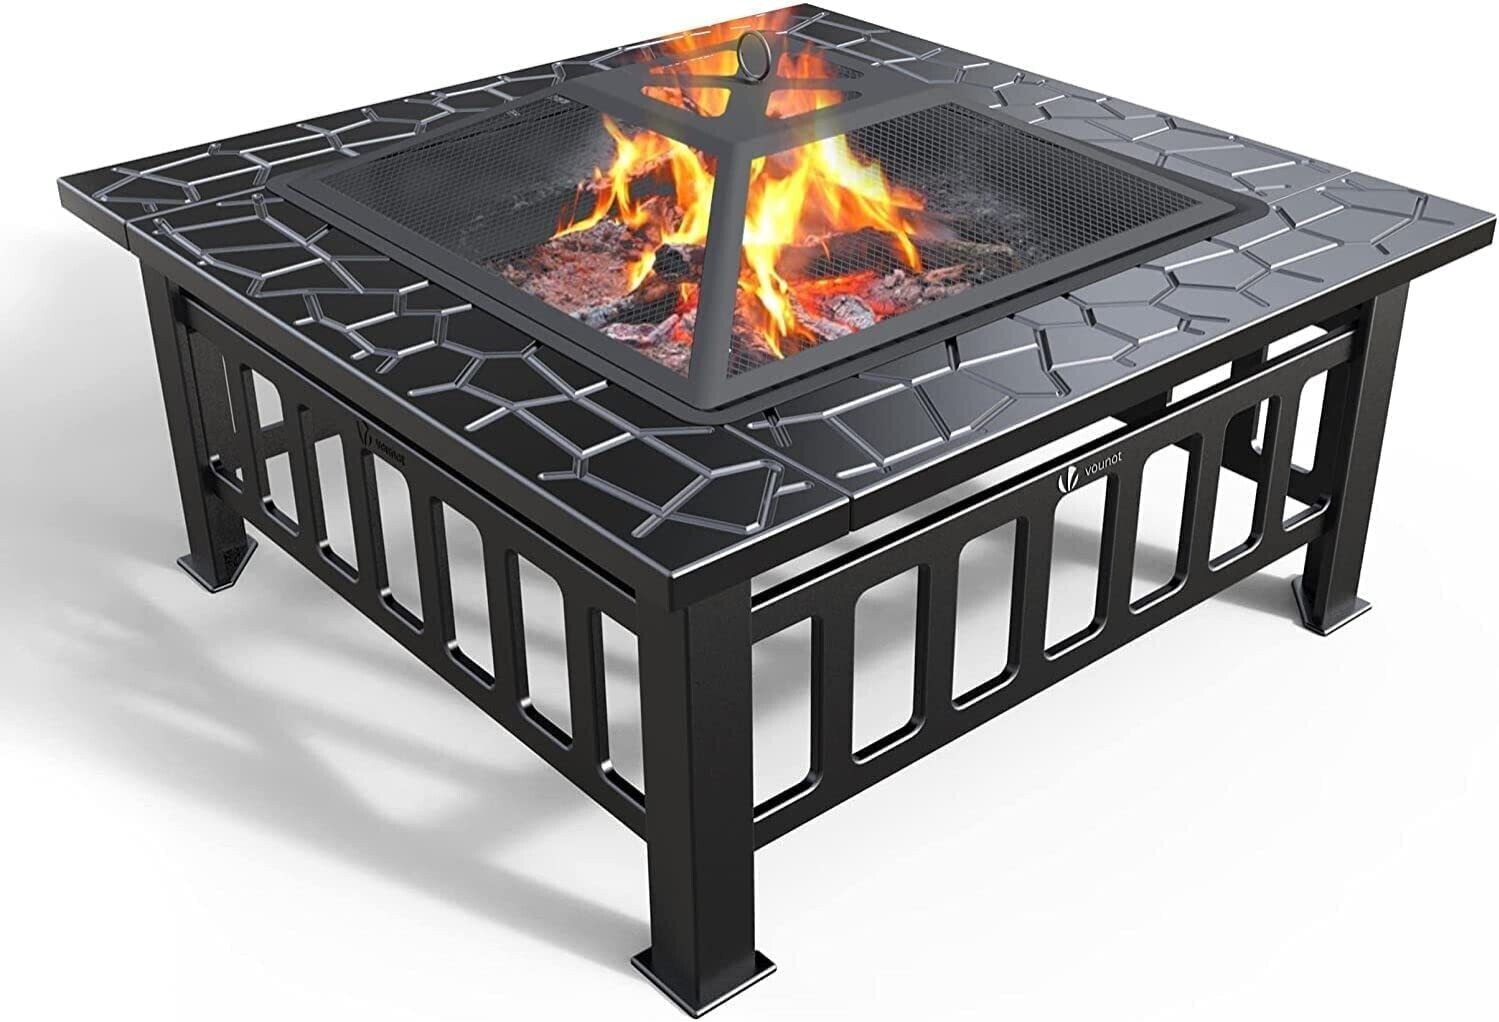 A fire bowl with a grill grate and a spark guard,